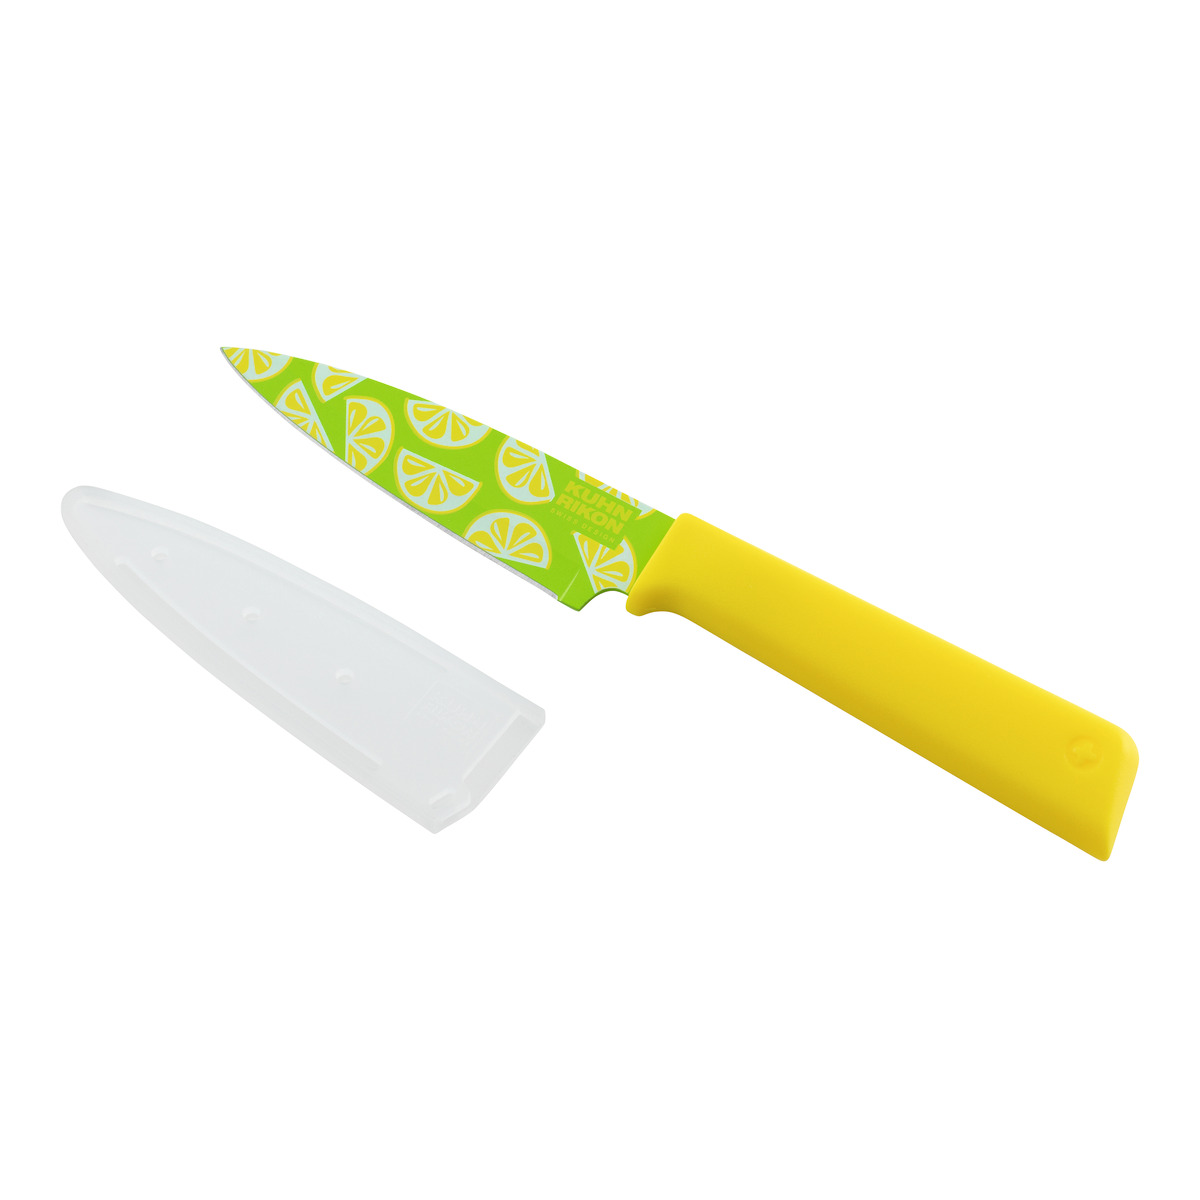 Image of Kuhn Rikon - COLORI®+ Rüstmesser Zitrone (Limited Edition Funky Fruit)